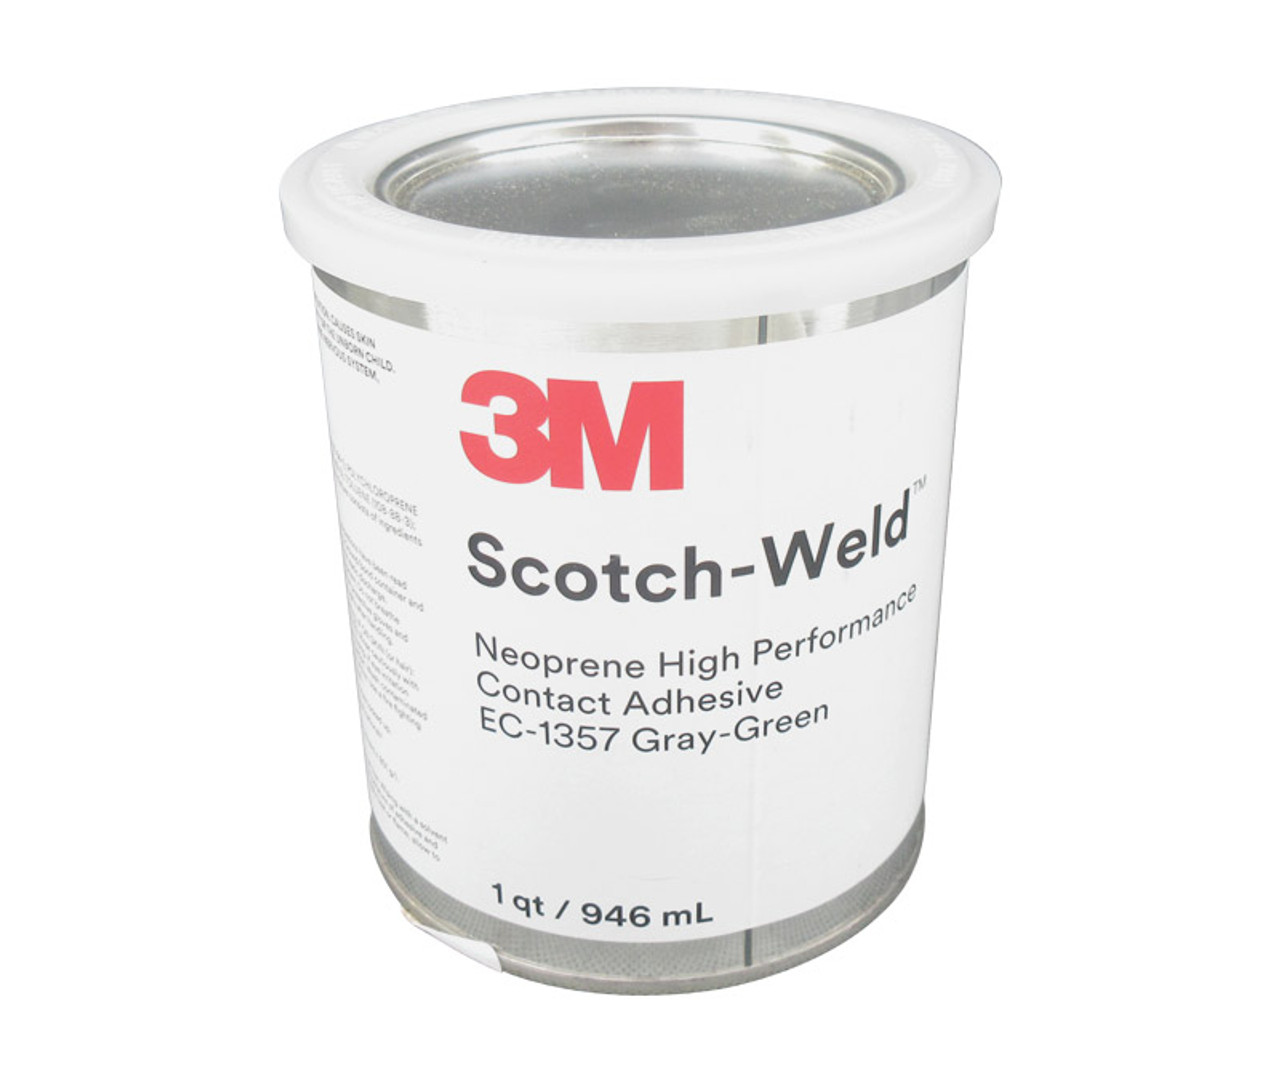 3M 021200-19891 Scotch-Weld EC-1357 Gray-Green Neoprene High Performance  Contact Adhesive - Pint Can at